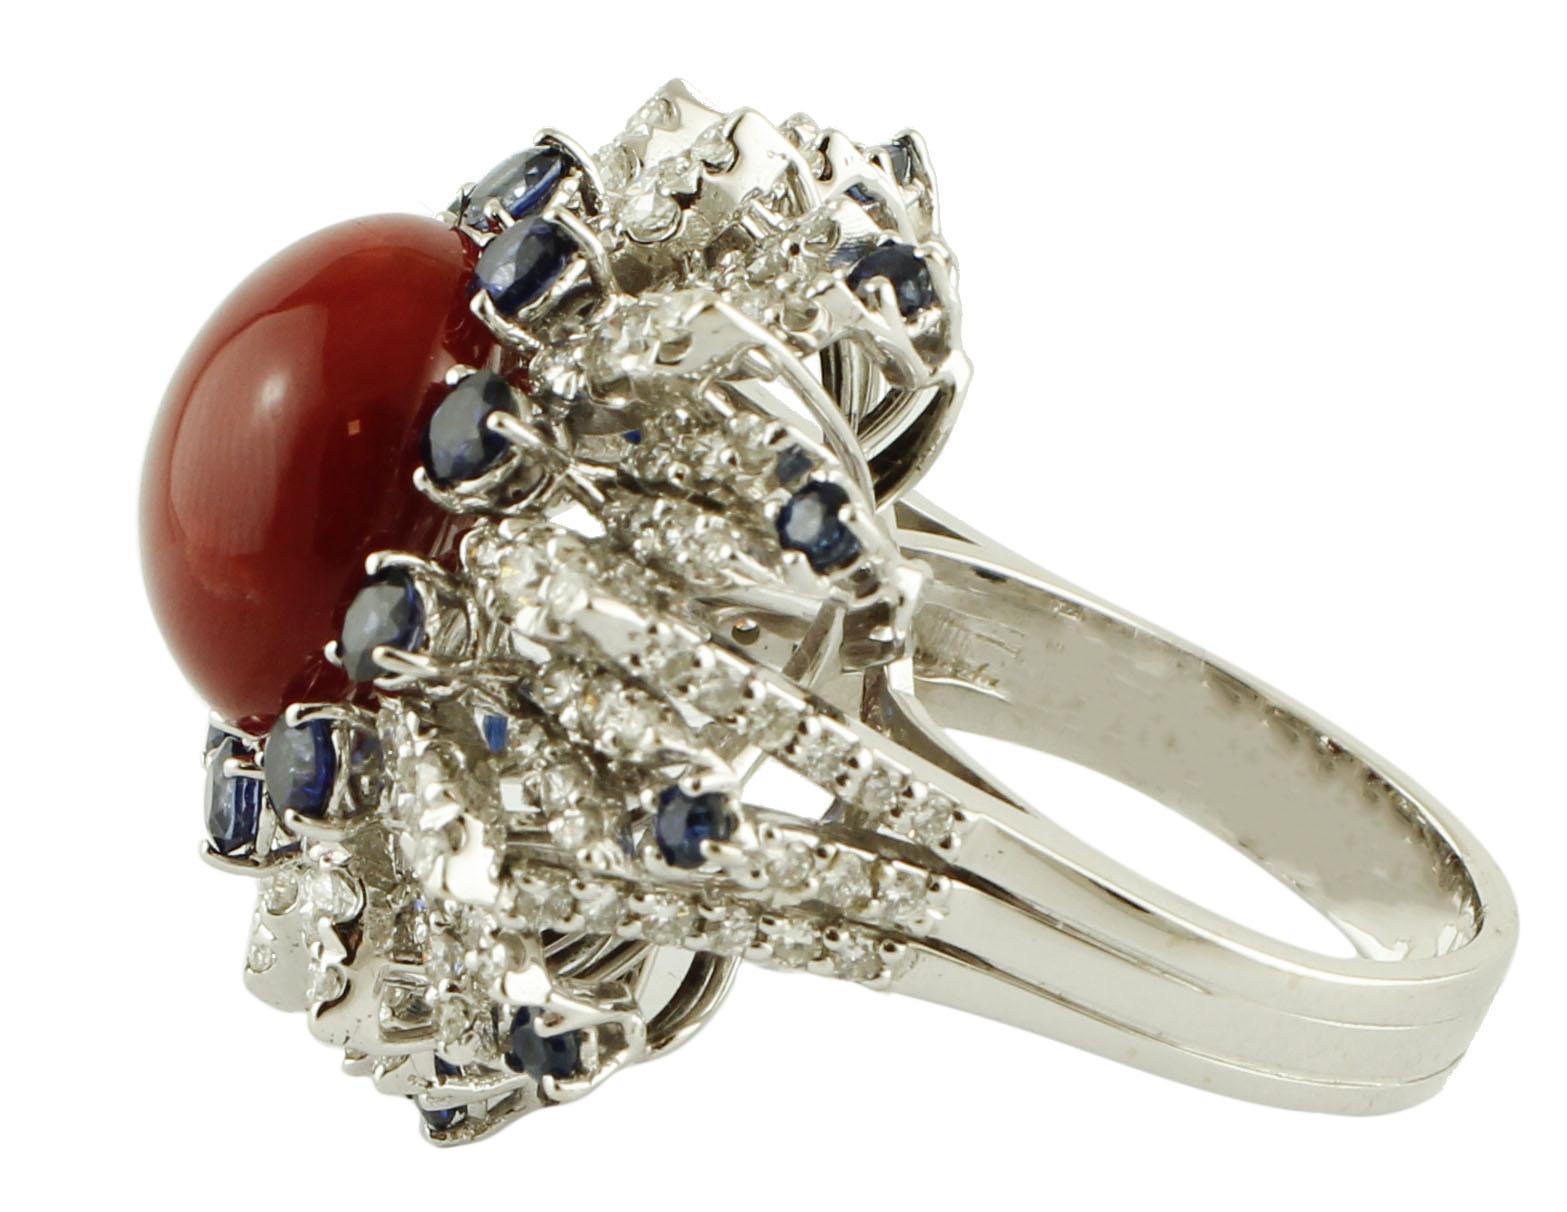 Astonishing ring in 14k white gold, mounted with a central oxblood coral sphere surrounded by a crown of intense blue sapphires and by white gold leaves studded with diamonds. 
This ring is totally handmade by Italian master goldsmiths
Oxblood Coral